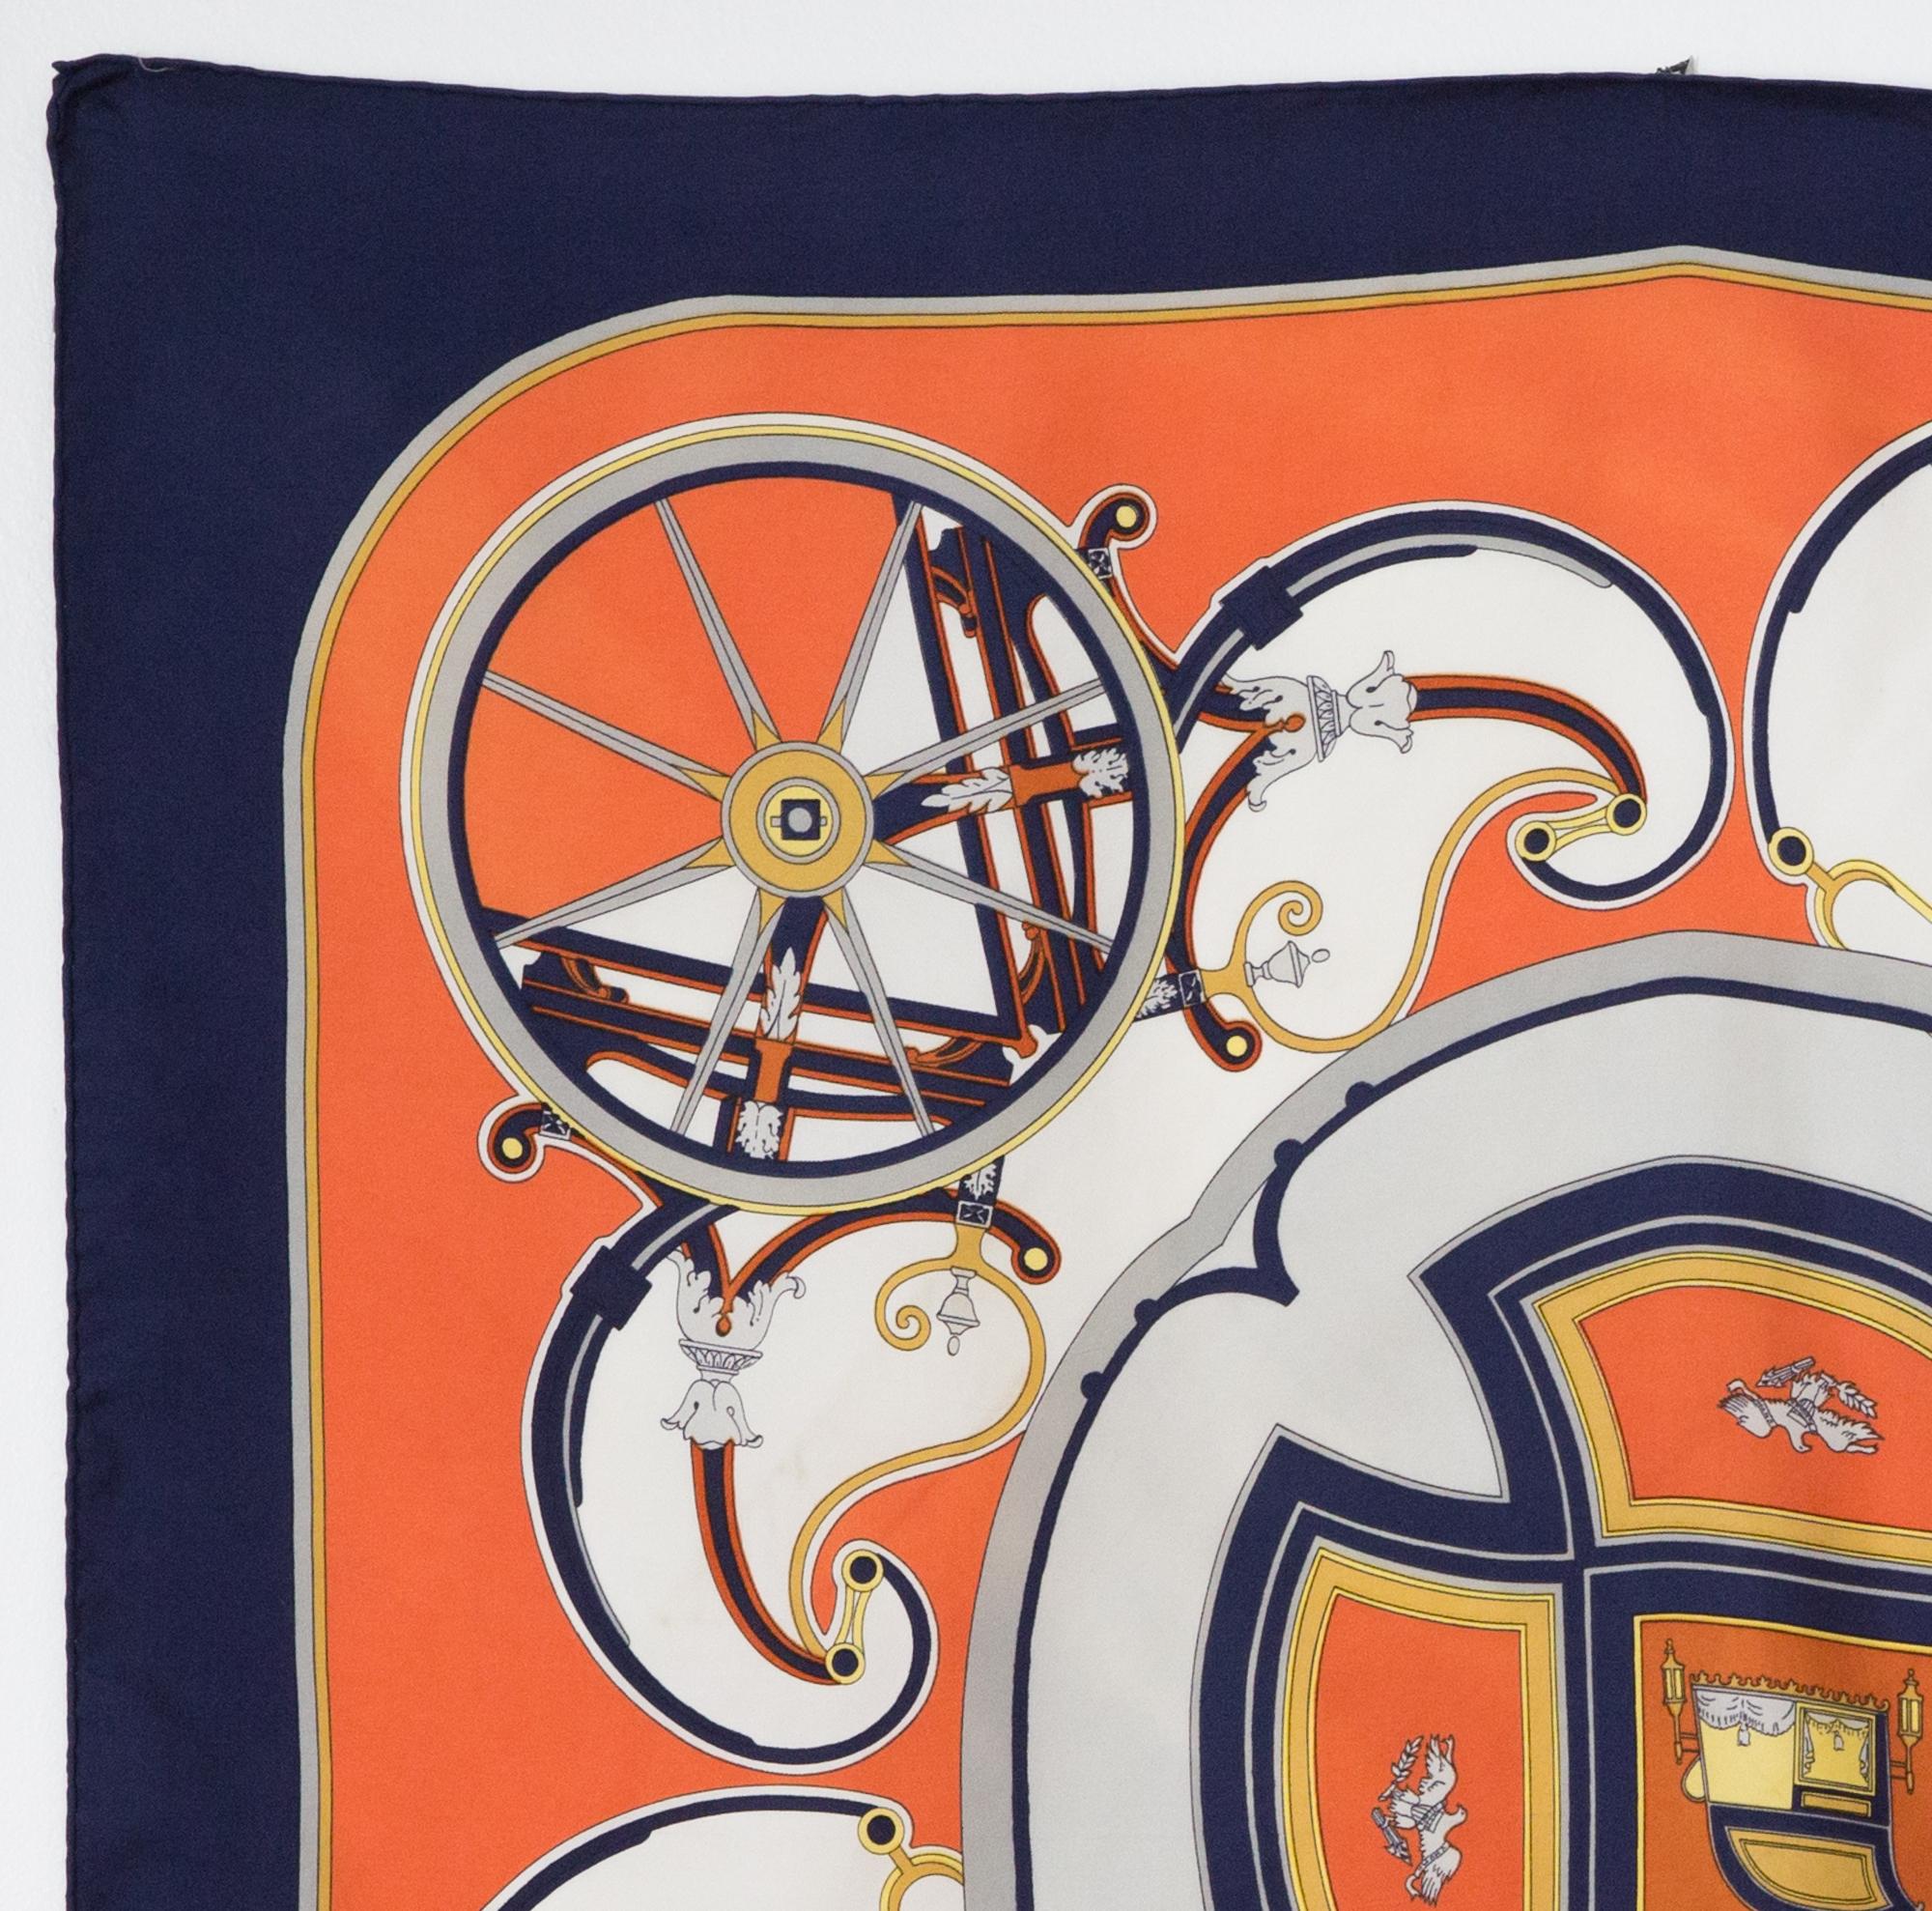 Hermes silk scarf Washington Carriage by Caty Latham featuring a navy border and a Hermes signature.
First edition: 1981
In good vintage condition. Made in France.
35,4in. (90cm)  X 35,4in. (90cm)
We guarantee you will receive this  iconic item as